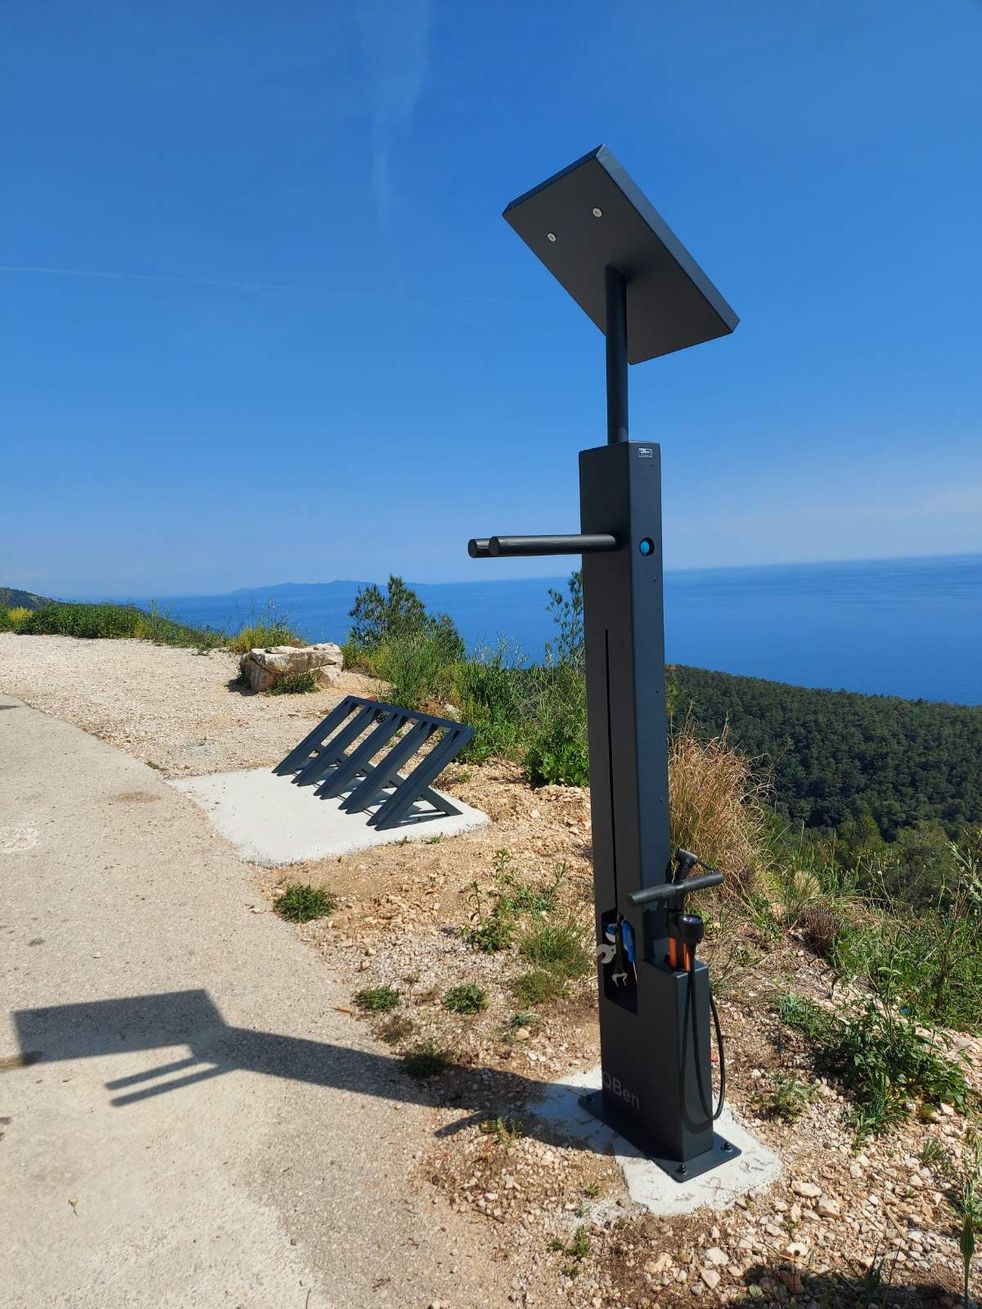 Five bicycle service points set up on the Korcula cycling route 